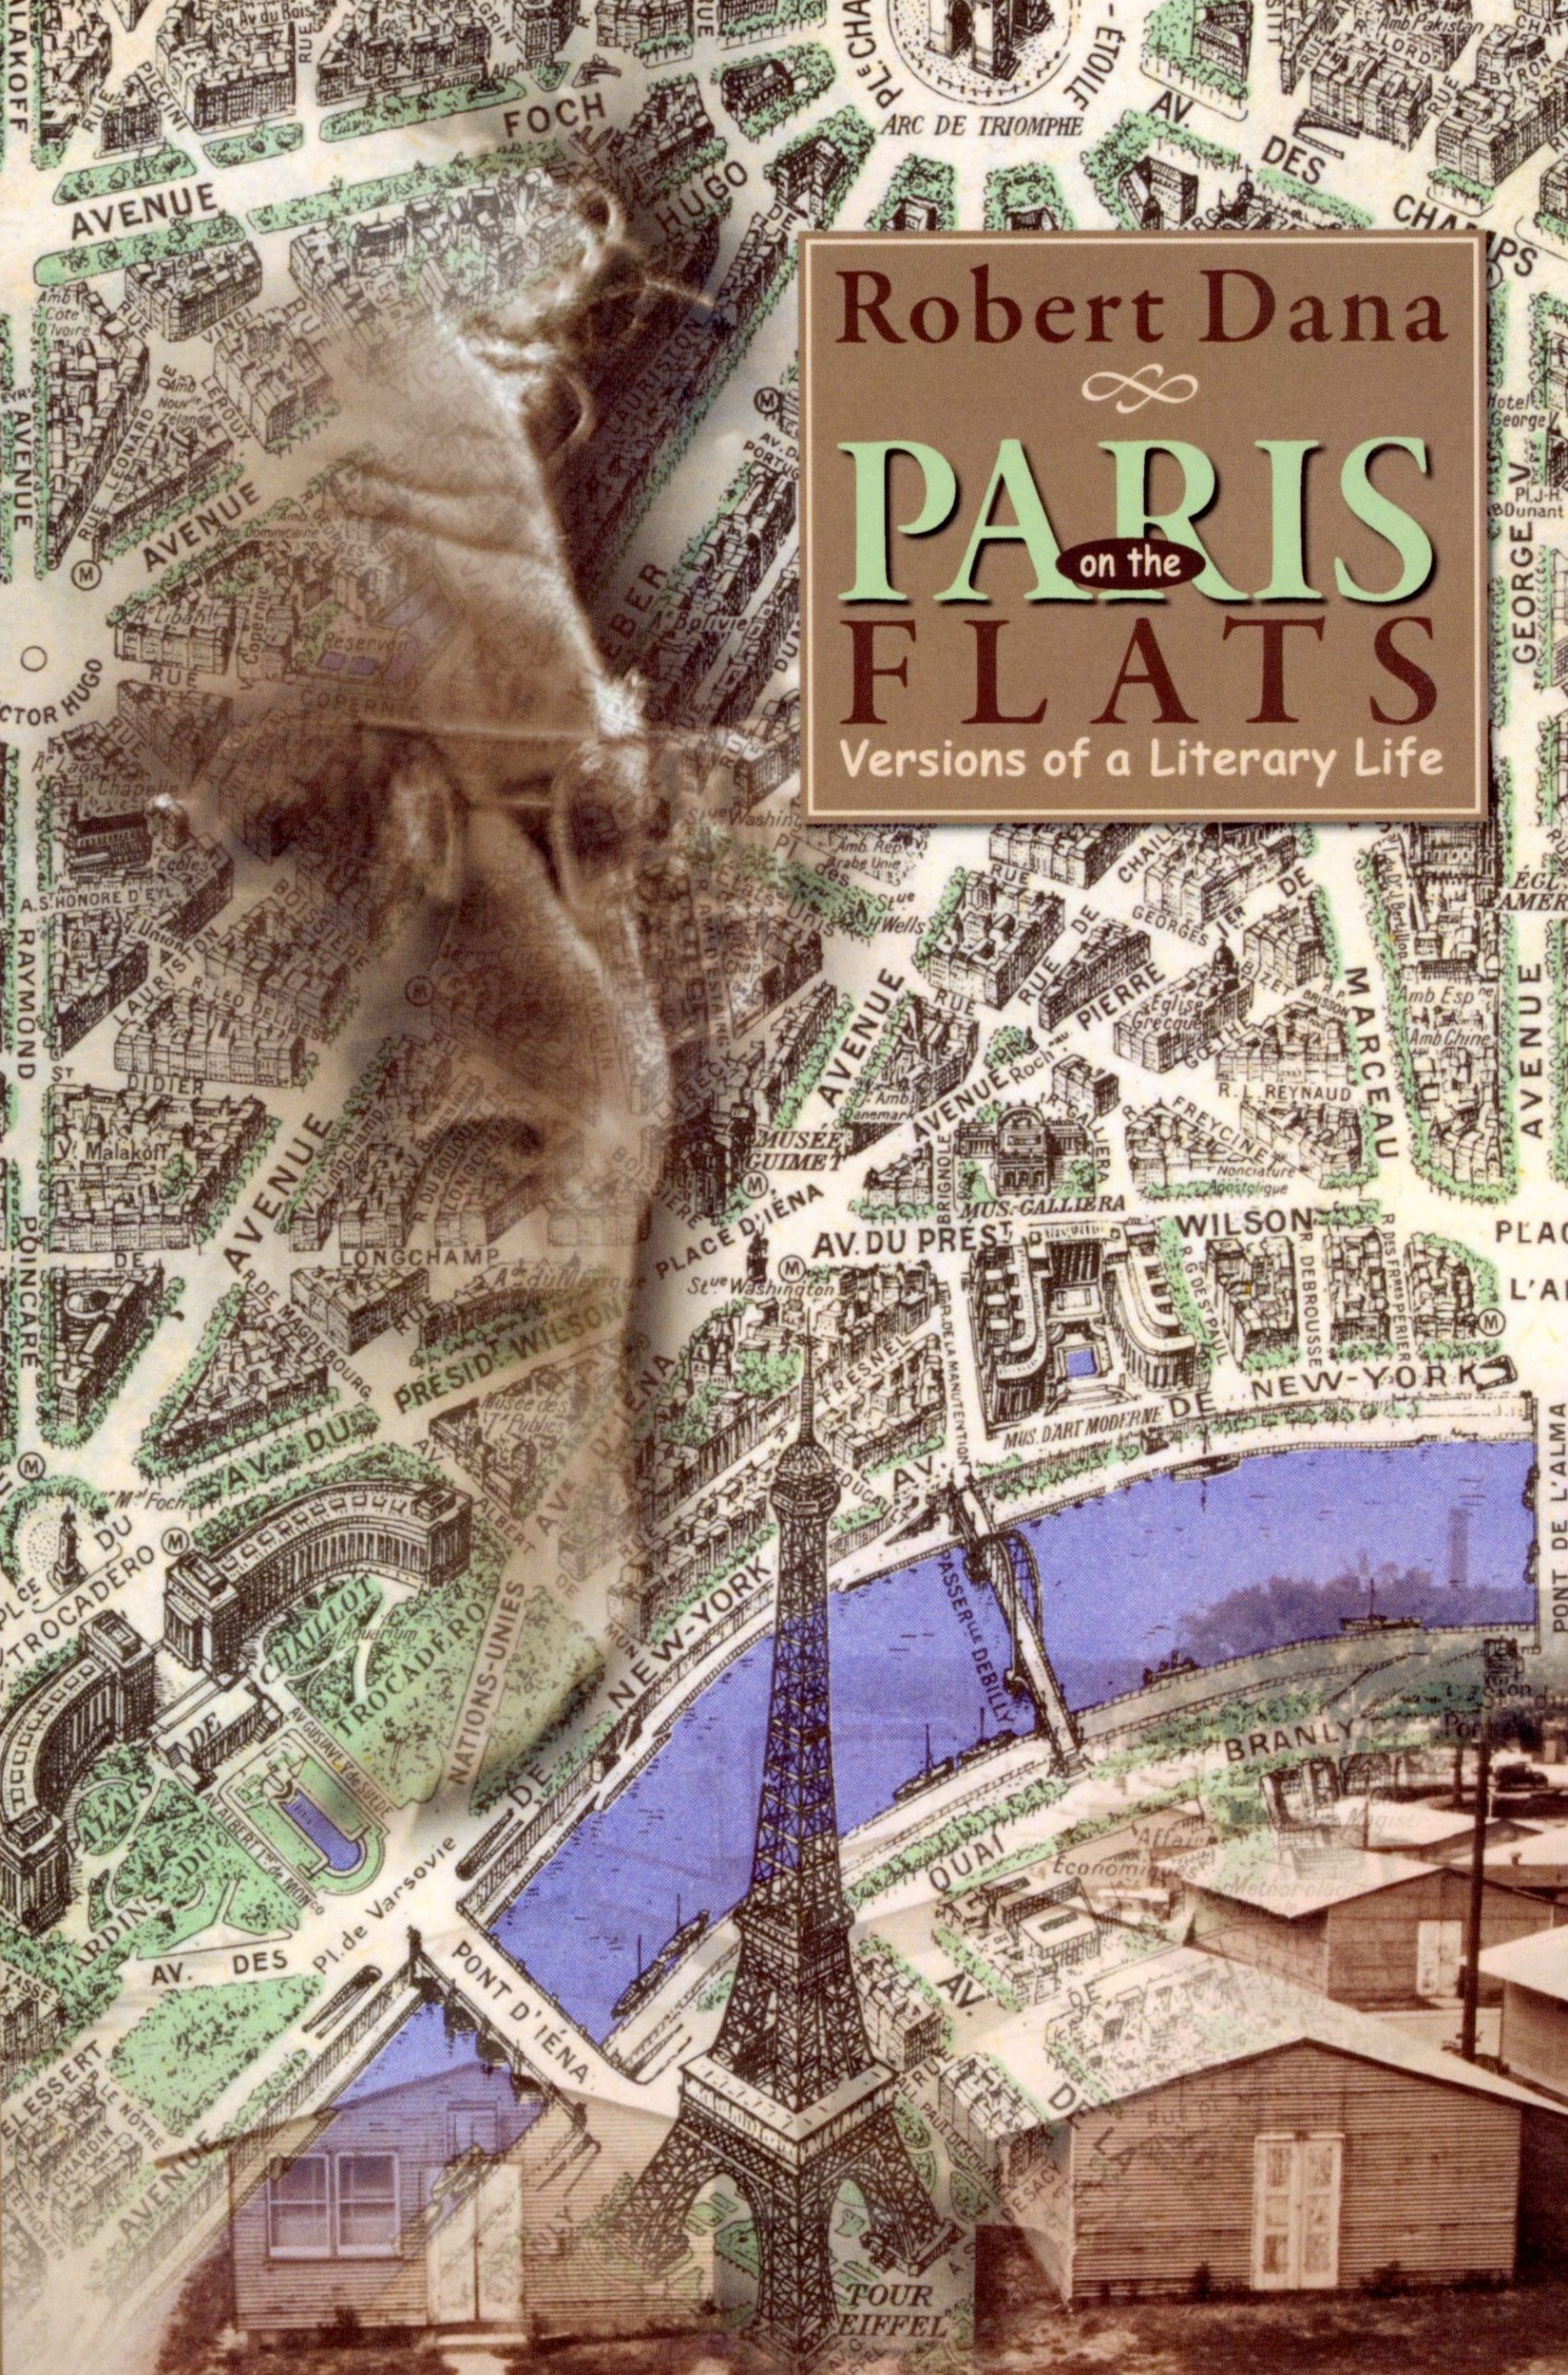 Image of the front cover of Paris on the Flats.